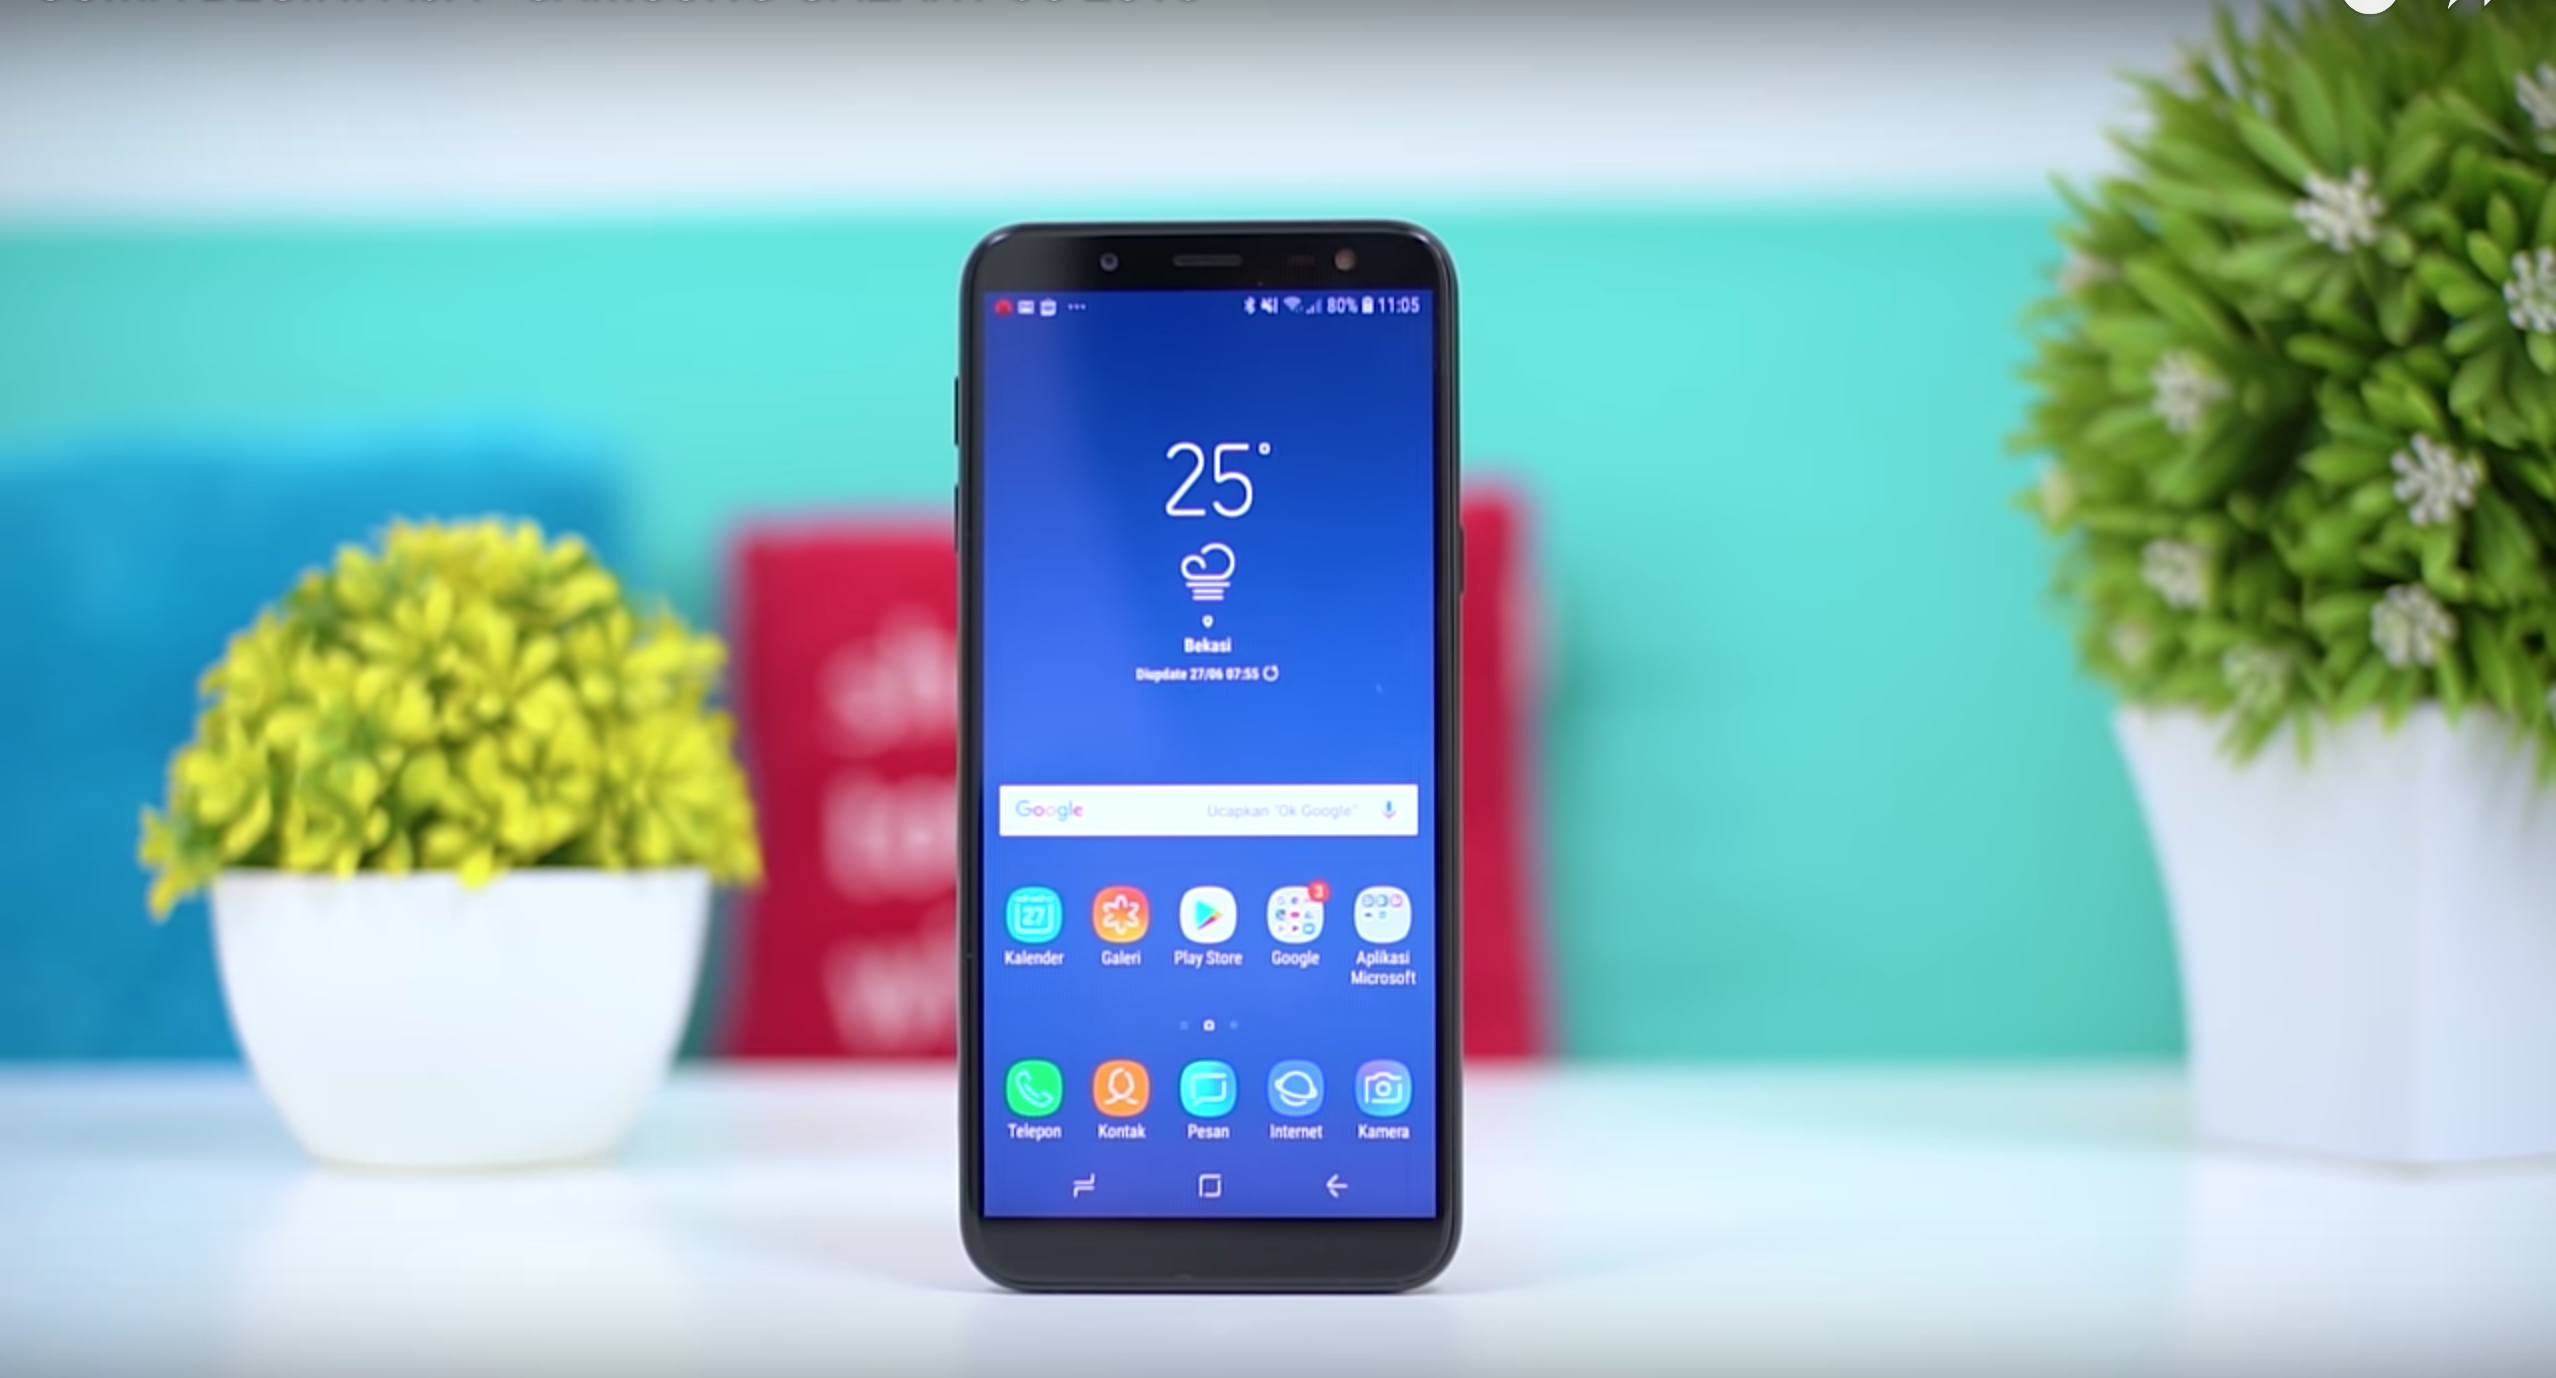 Samsung Galaxy J6 (2018) smartphone - pros and cons